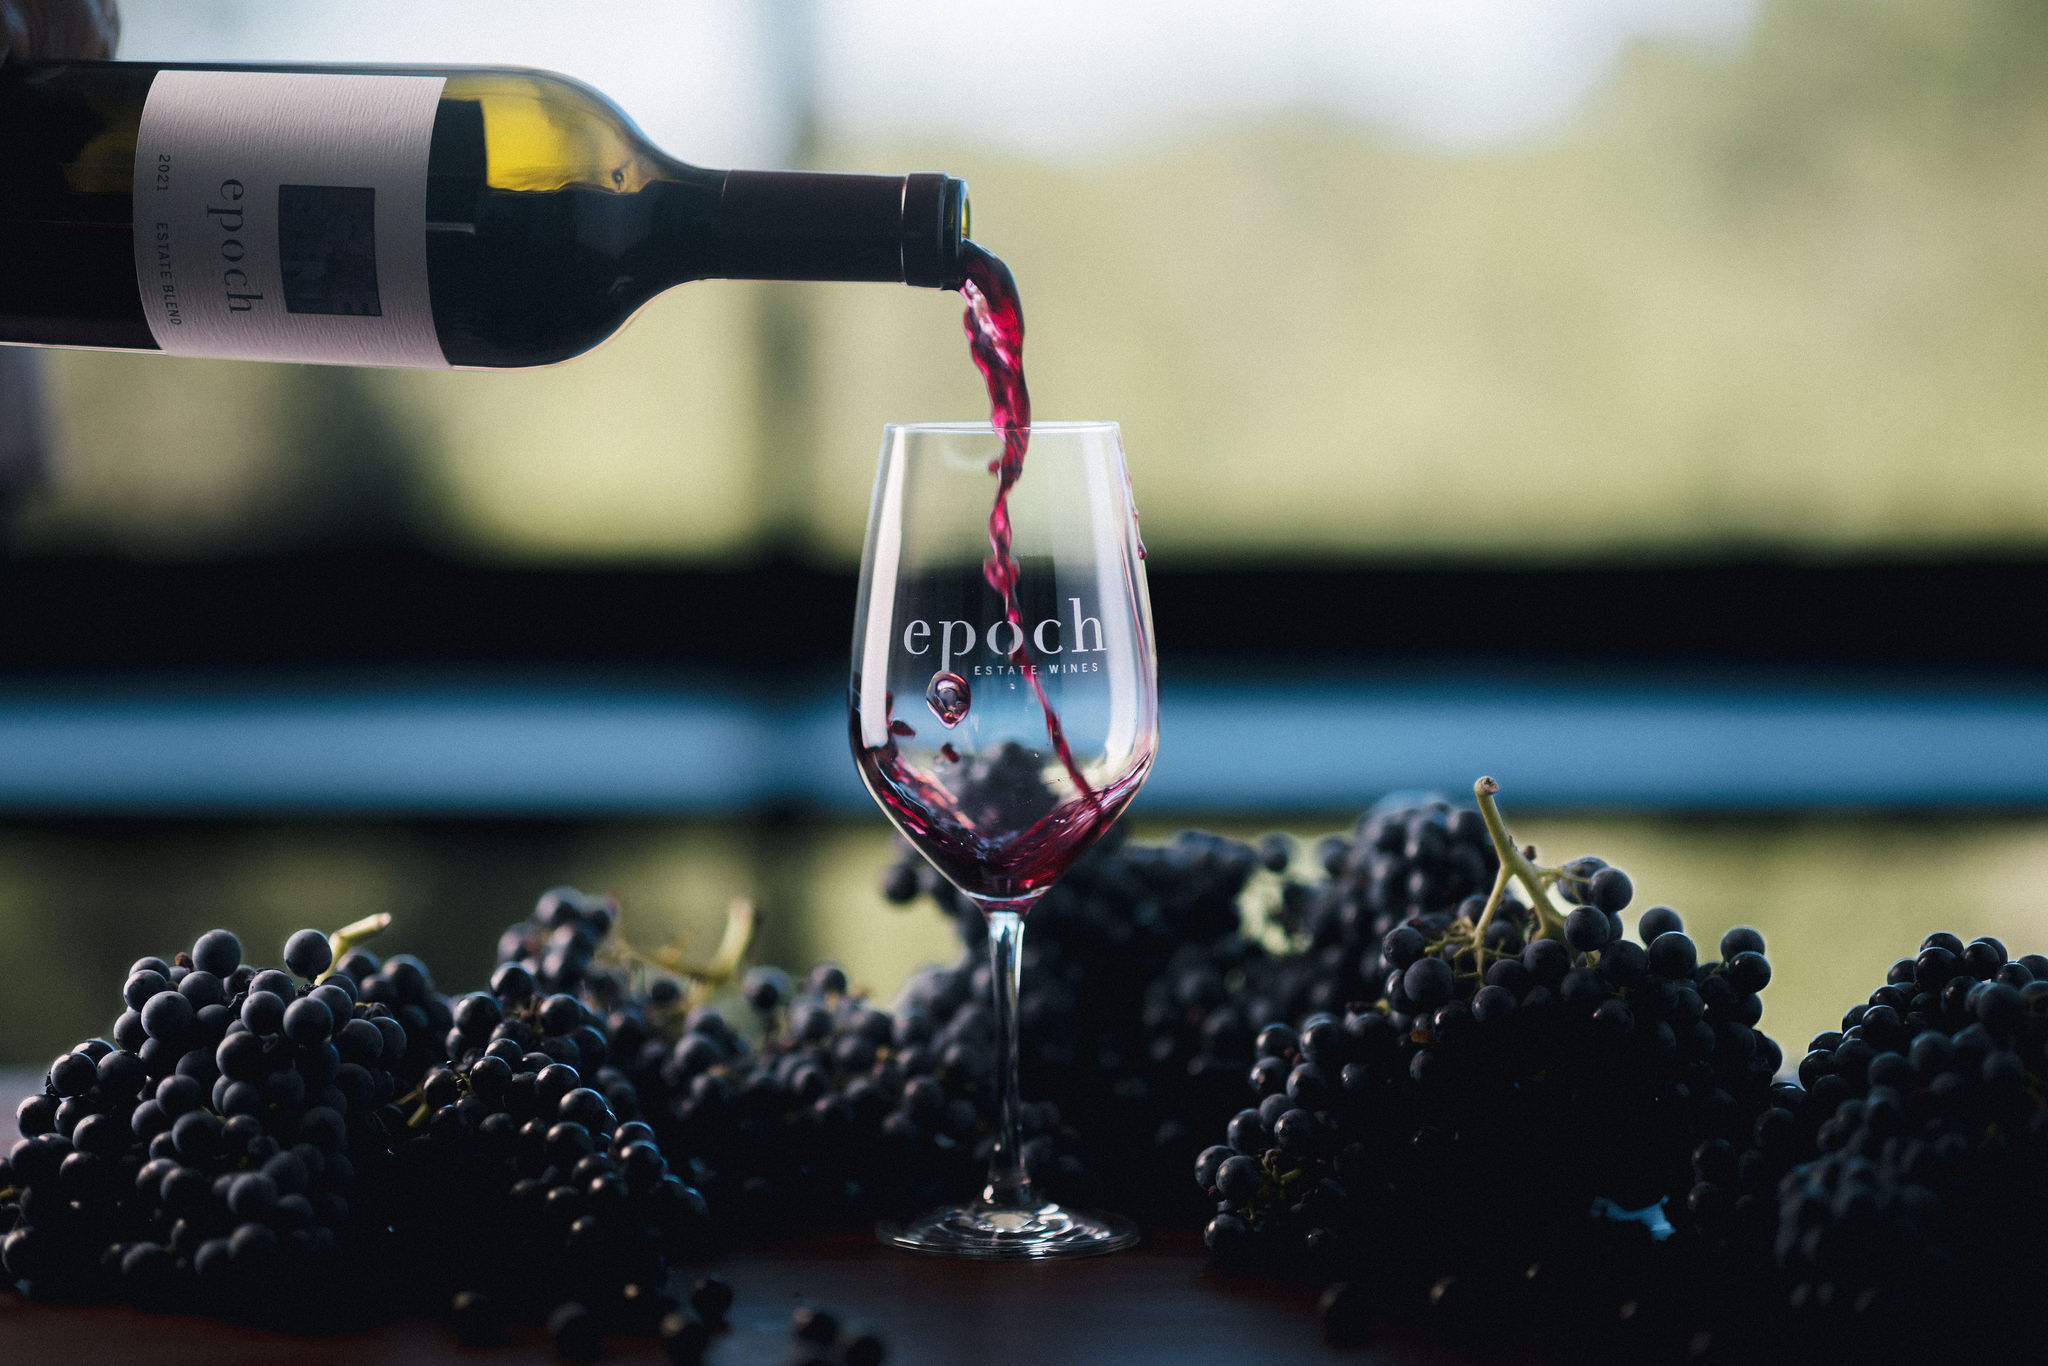 Bottle of Epoch wine being poured inot a glass surrounded by grapes